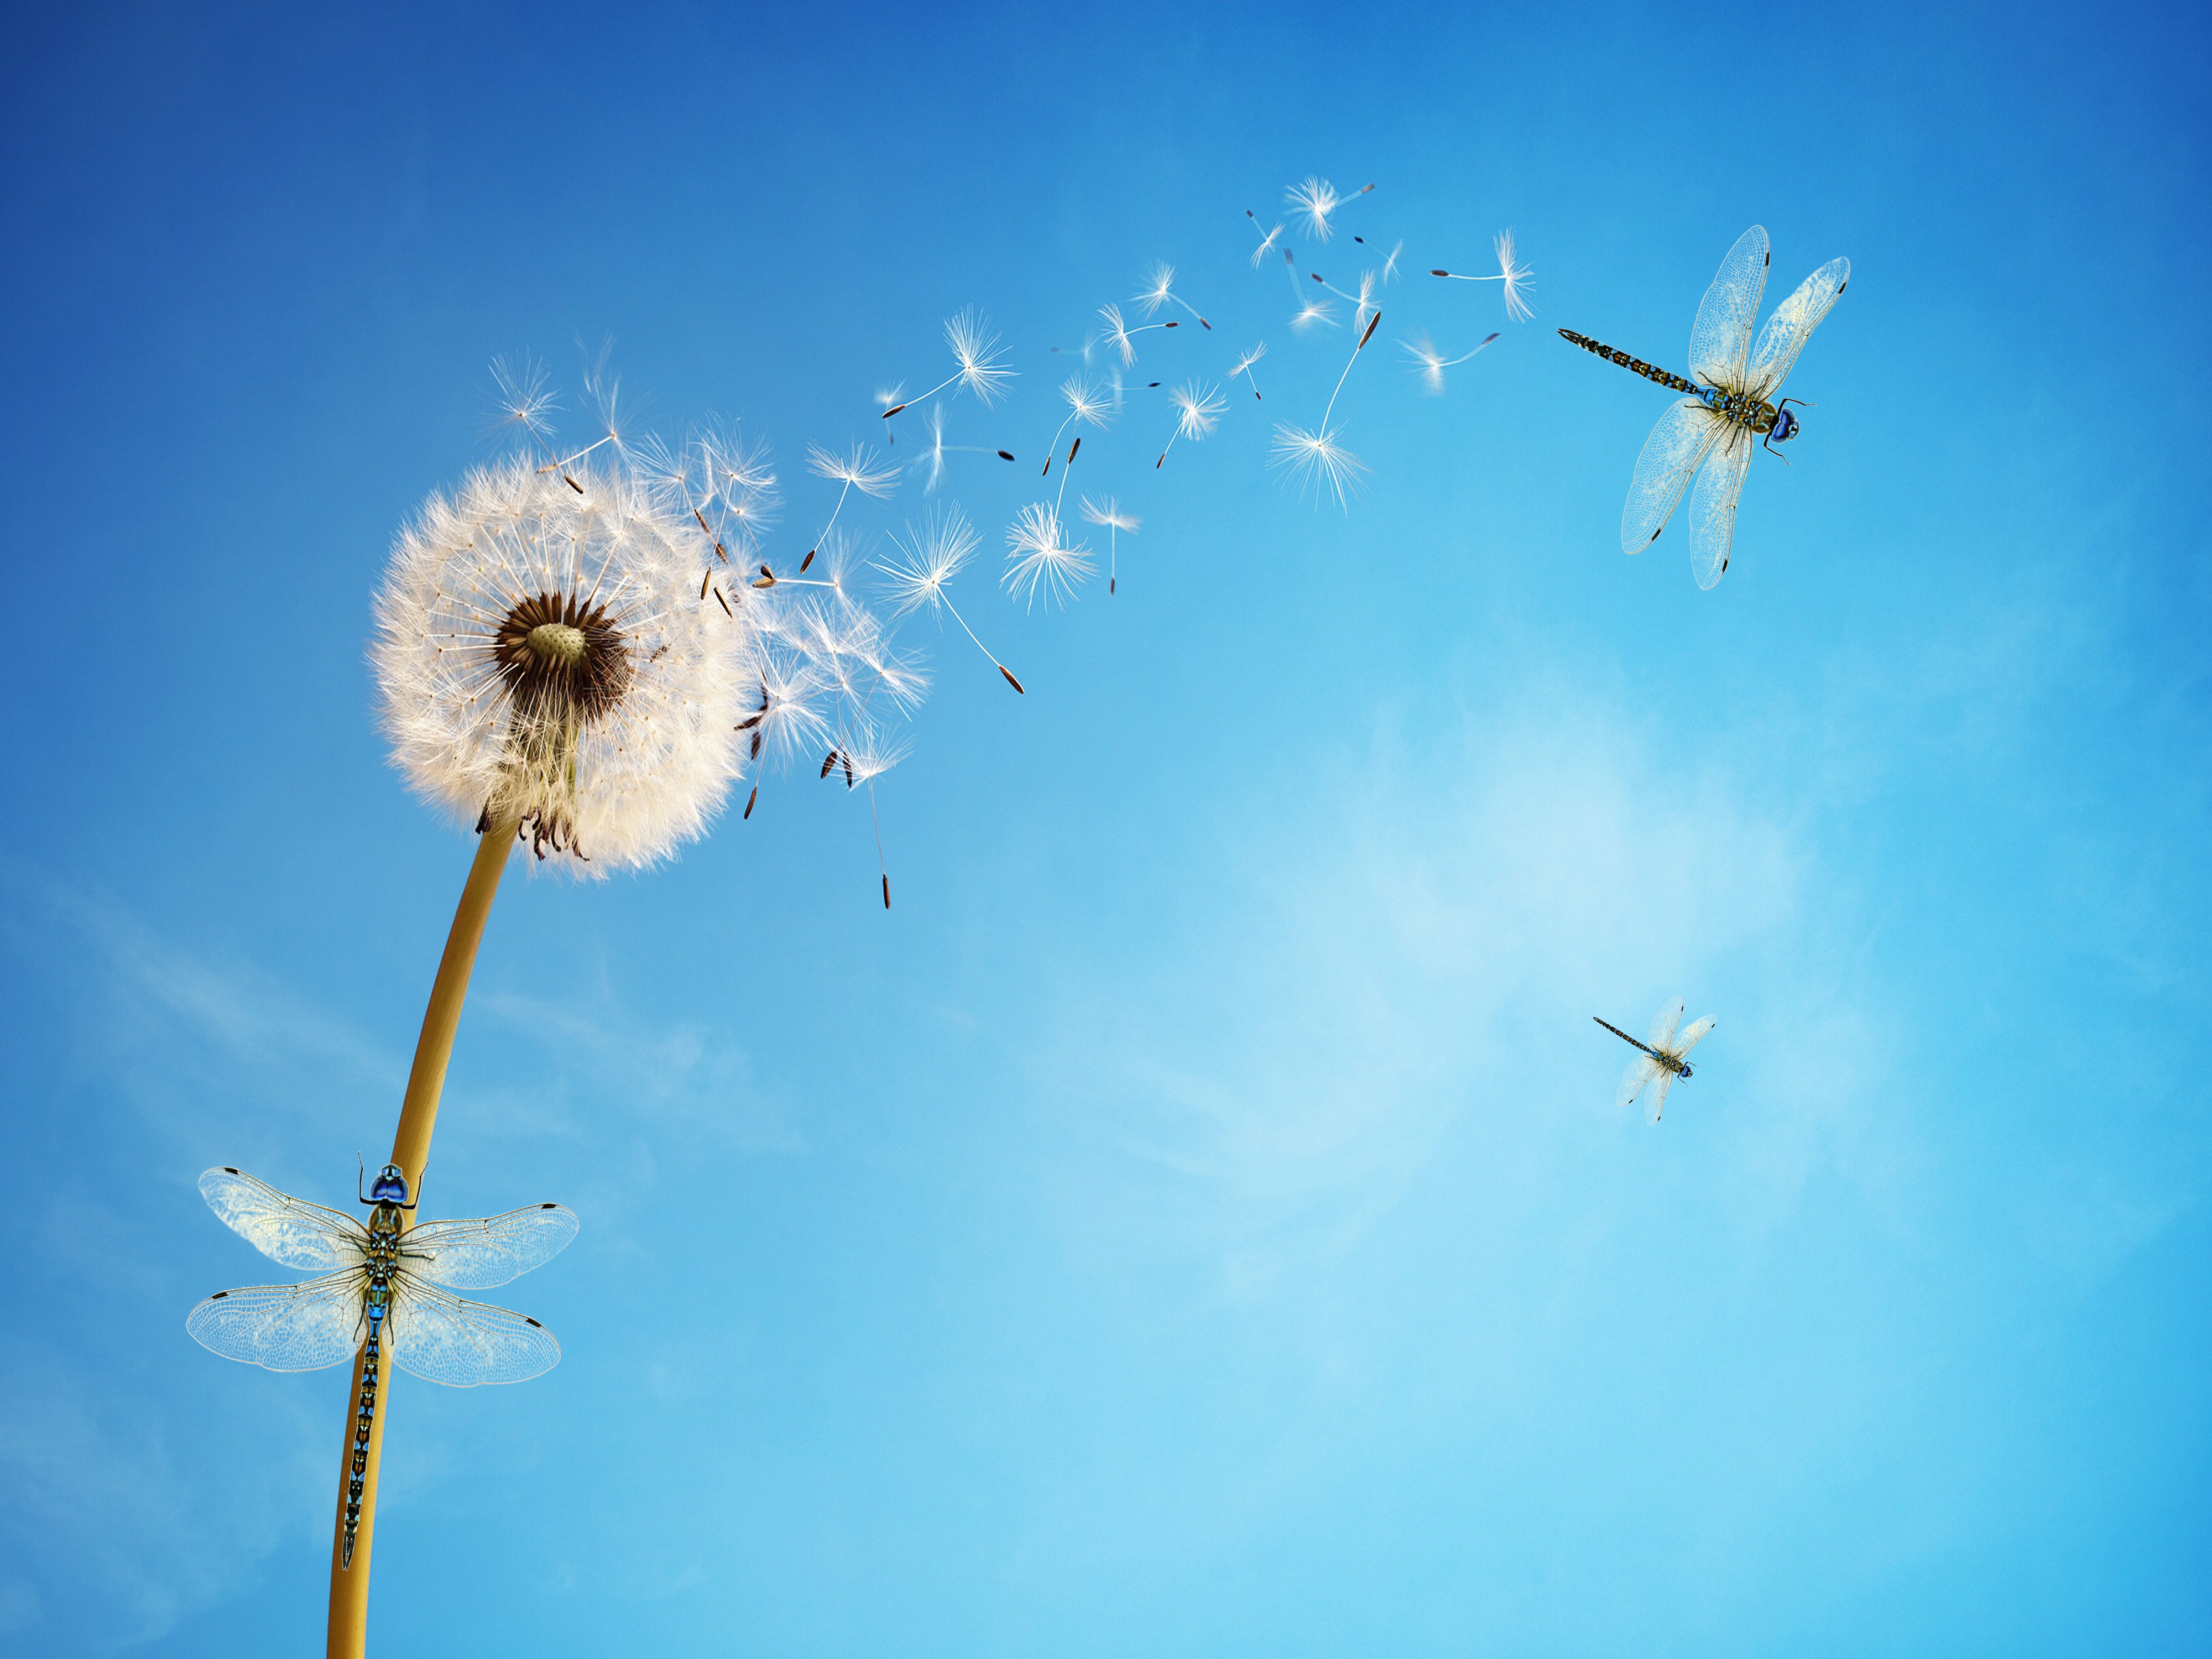 dandelion flower 4k wallpaper white dragonflies blue sky insects blue background sky view flowers 2366 dandelion flower 4k wallpaper white